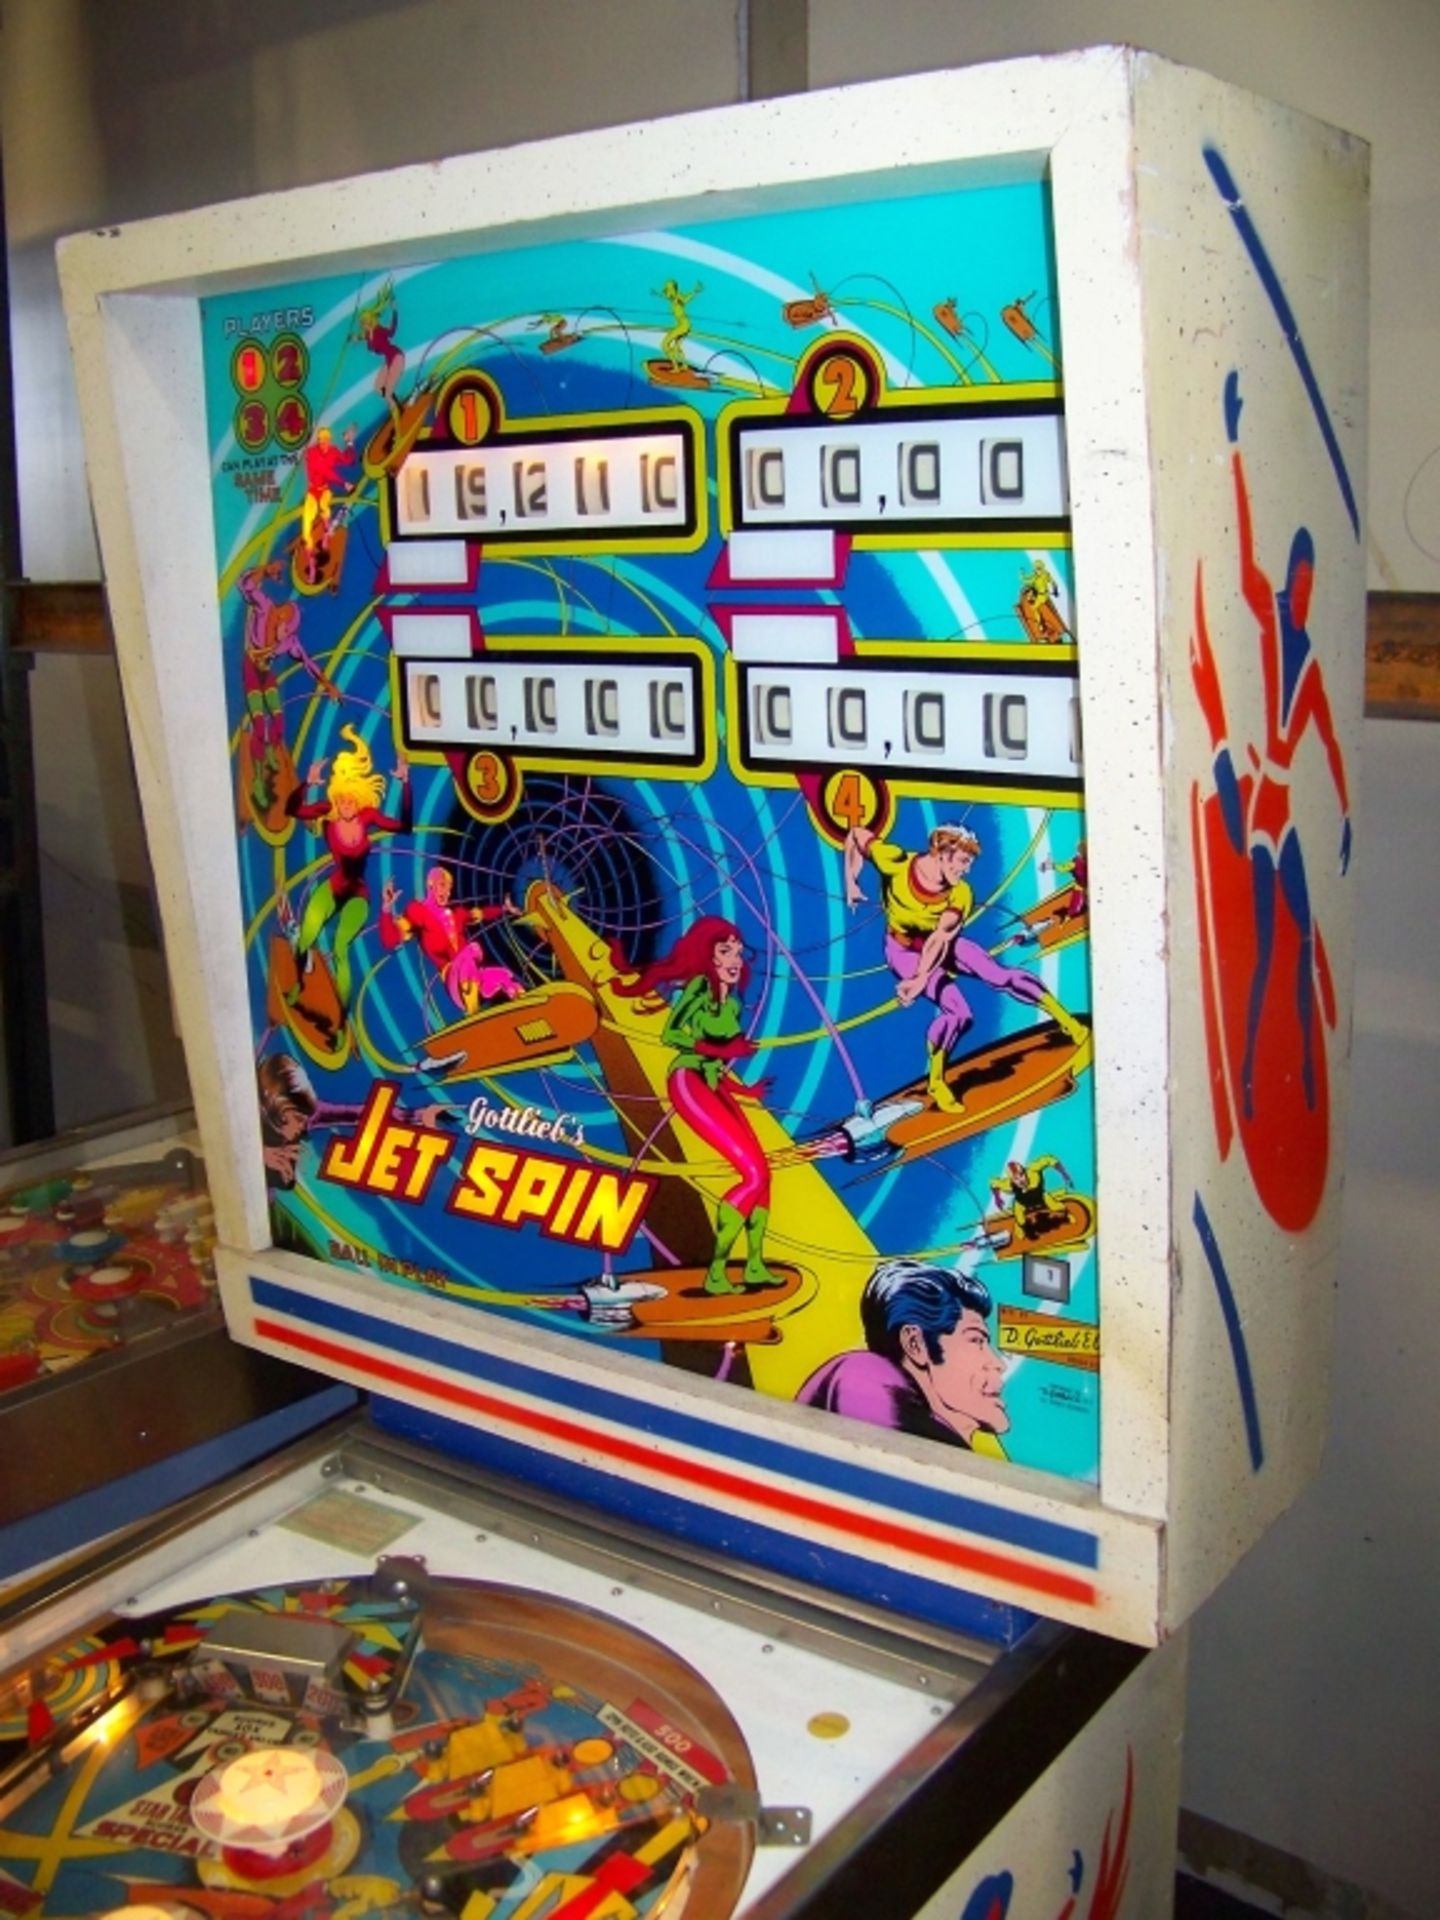 JET SPIN PINBALL MACHINE GOTTLIEB 1977 Item is in used condition. Evidence of wear and commercial - Image 3 of 8